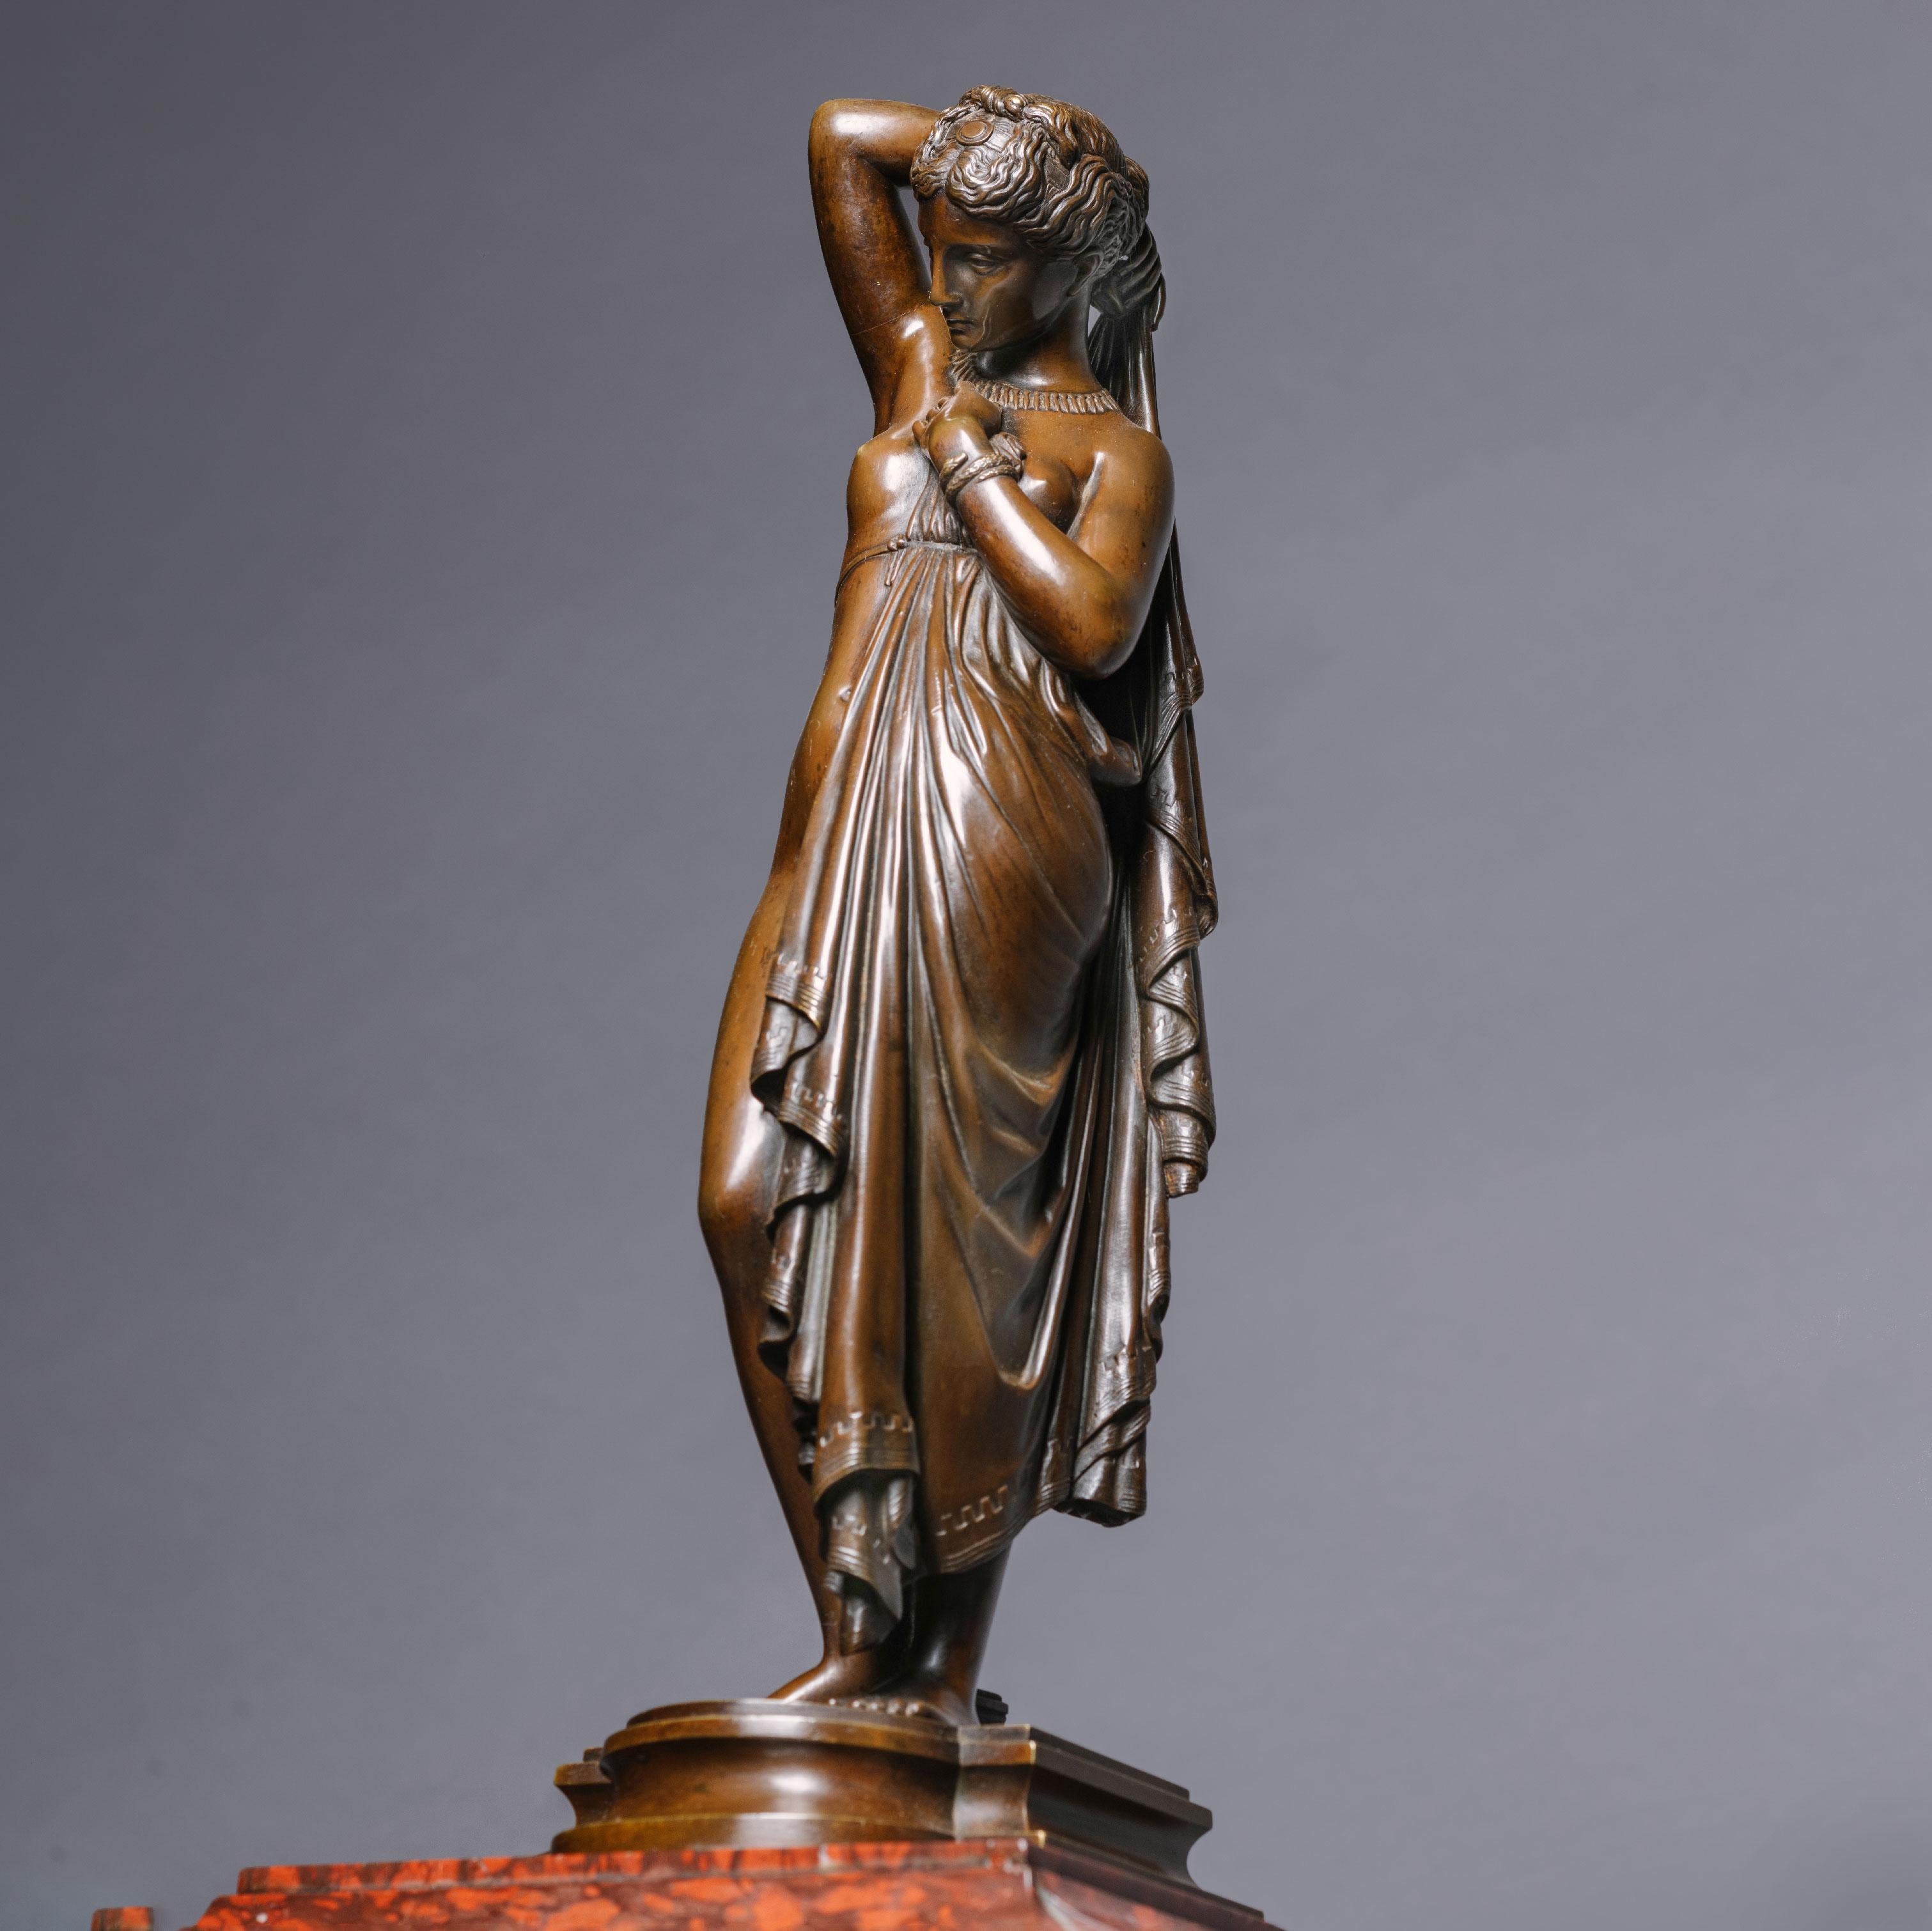 A Napoléon III Marble Mantle Clock With A Patinated Bronze Figure of 'Phryné' by James Pradier. France, Circa 1860.

Surmounted by a finely cast patinated bronze figure of the Grecian courtesan, 'Phryne', cast from the model by Jean Jacques (called